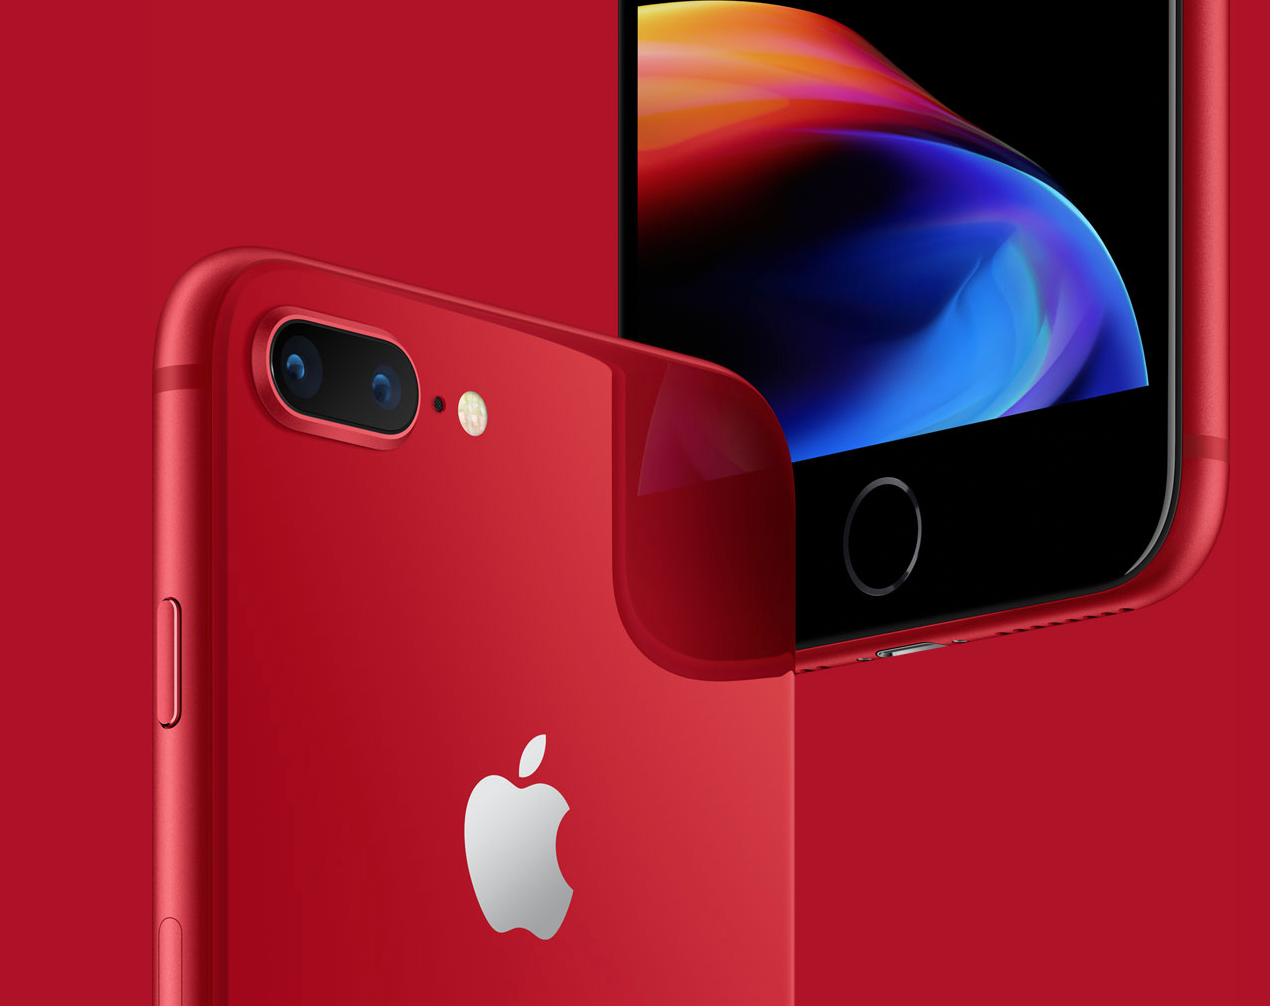 What is exactly Product (RED) iPhone 8 & iPhone 8 Plus